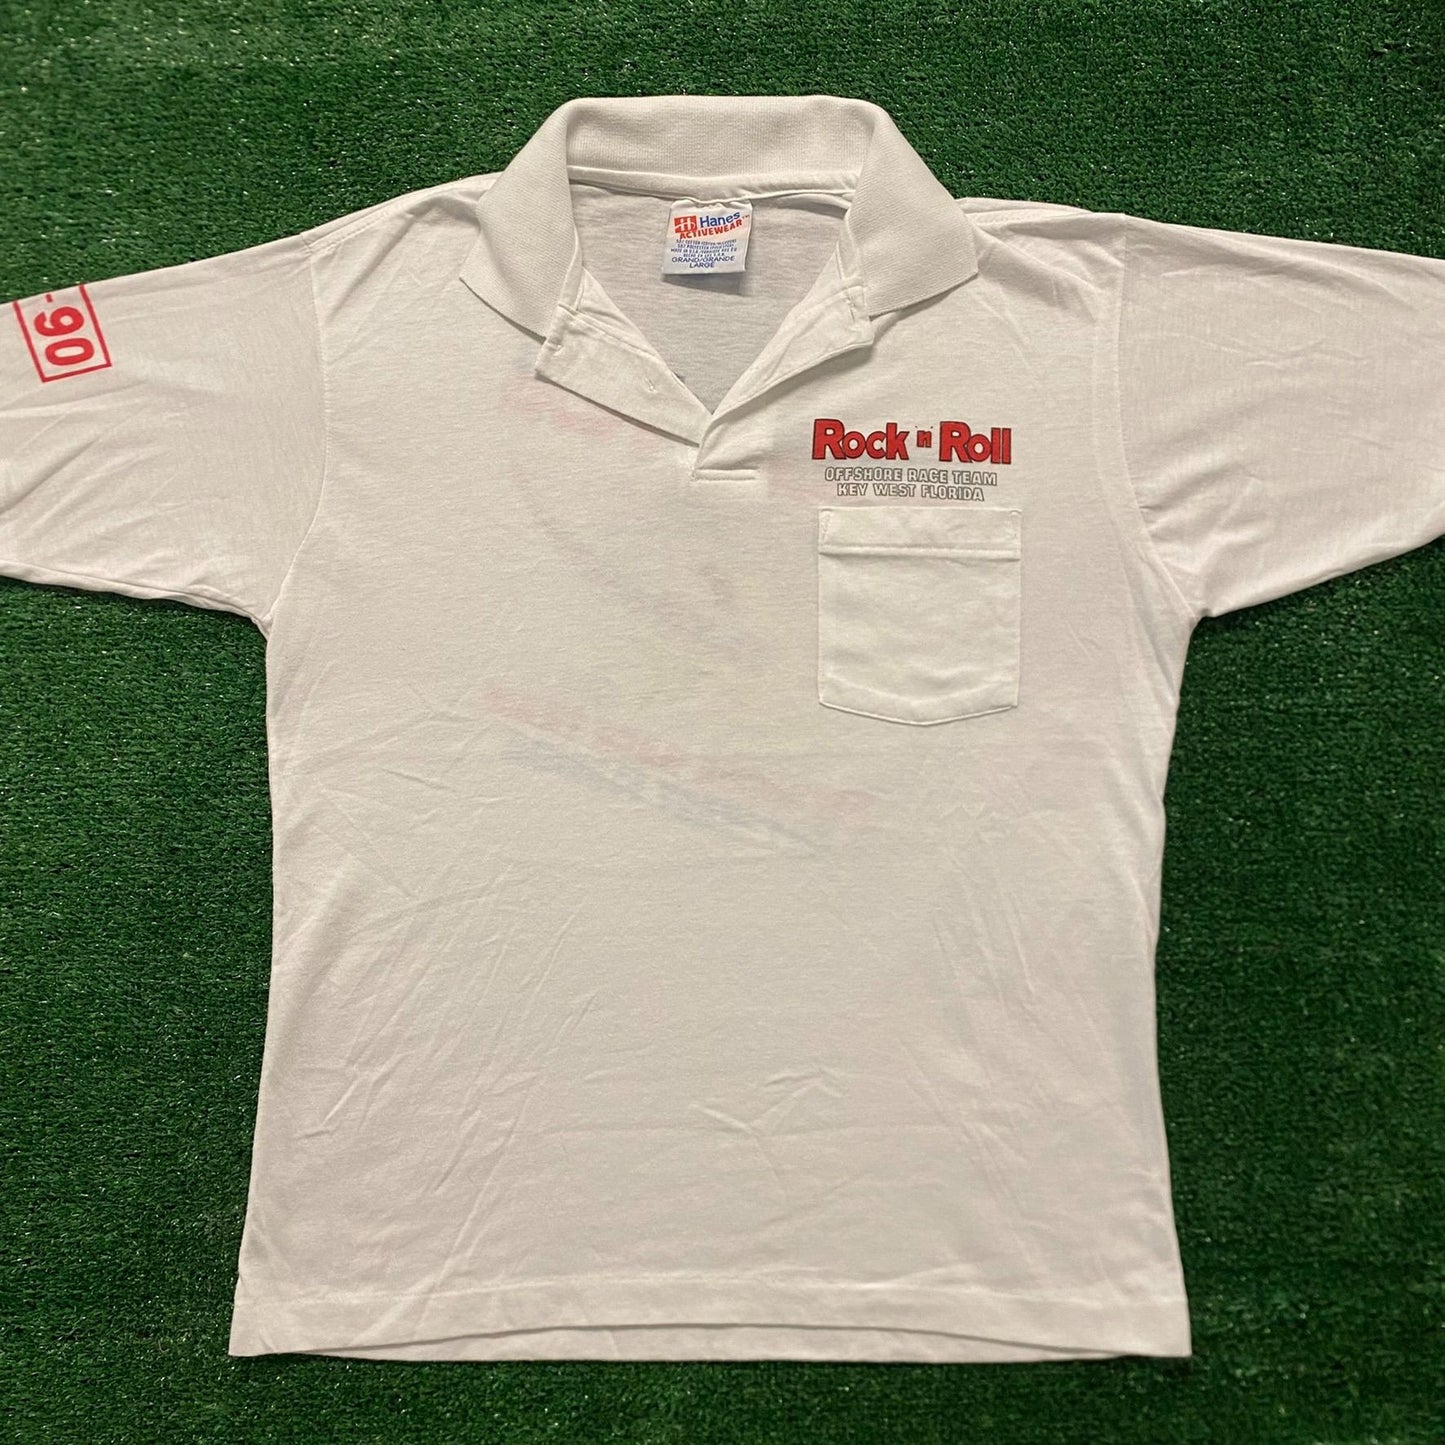 Key West Boat Racing Vintage 90s Polo Shirt